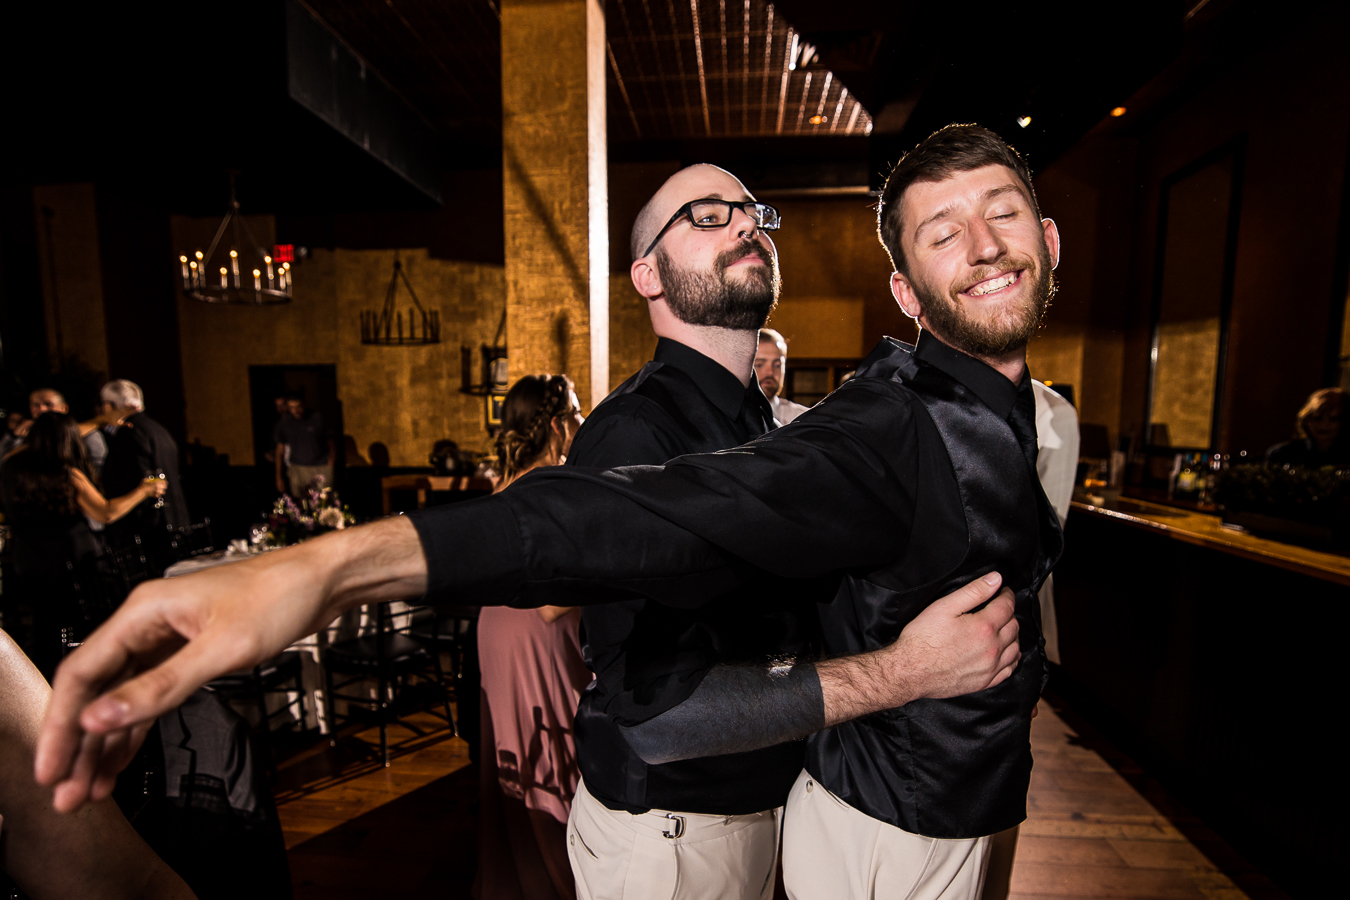 fun dancing image of two guys holding eachother in the titanic pose during the wedding reception